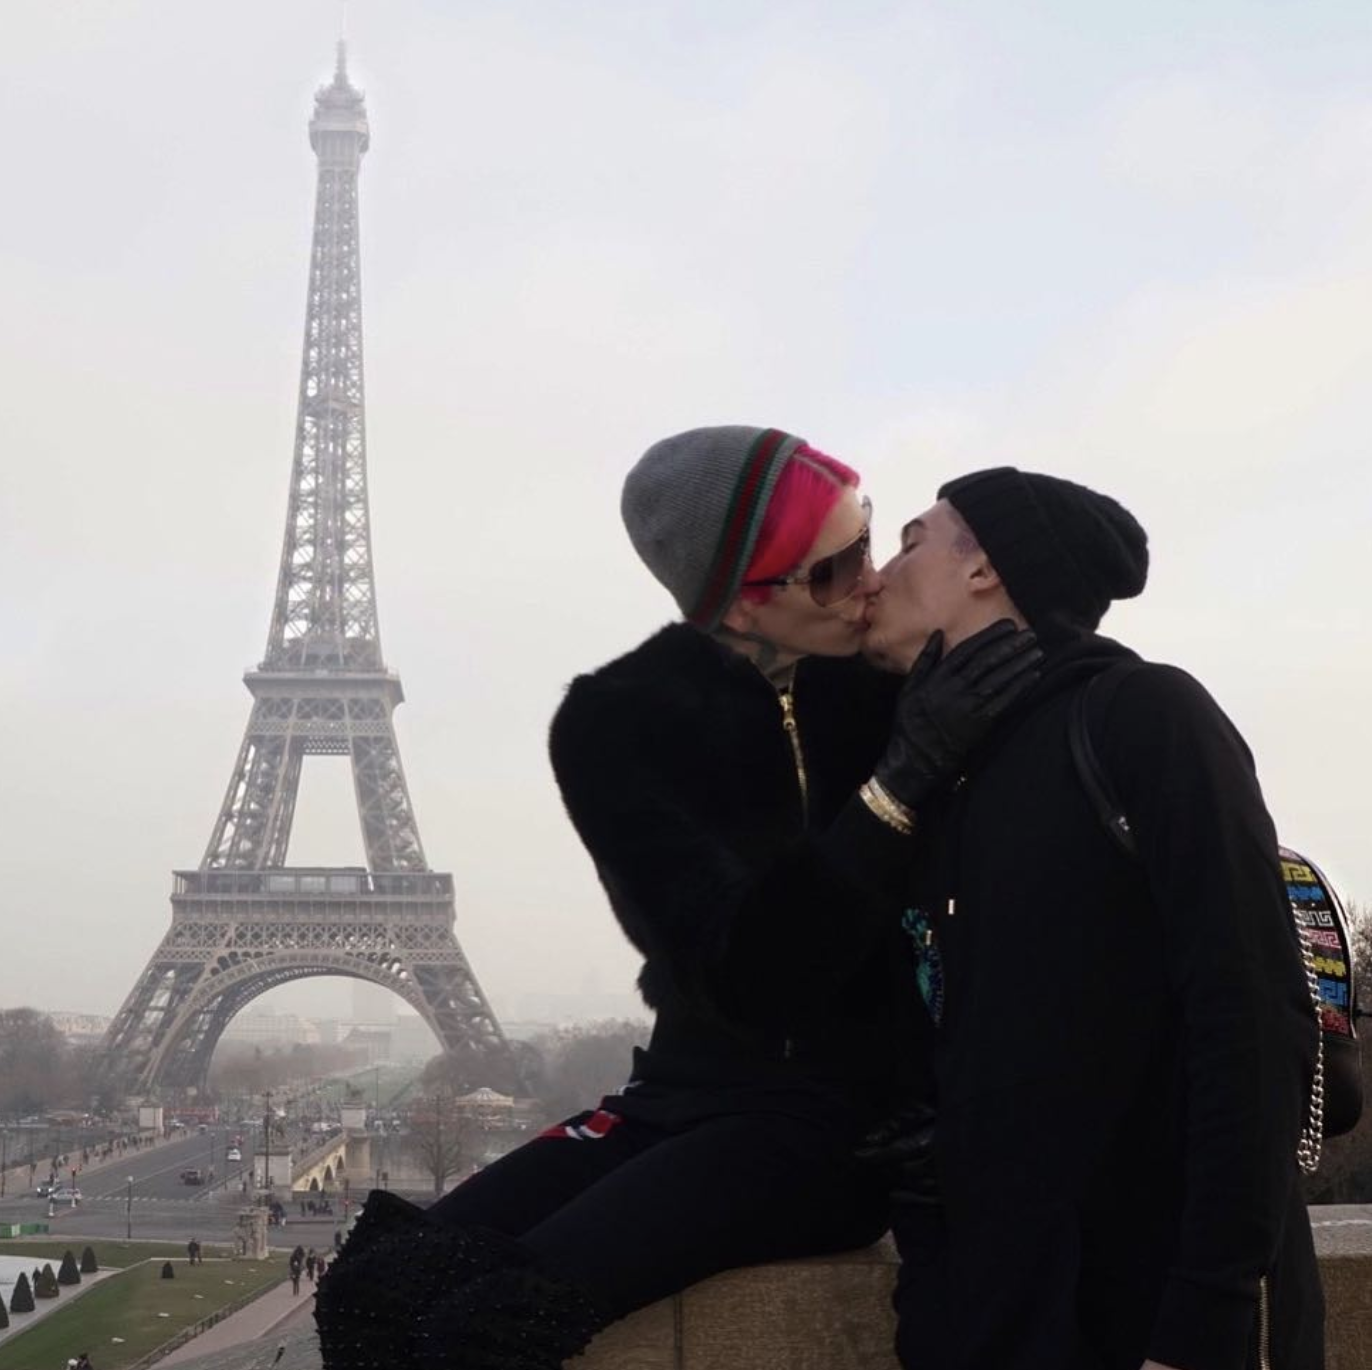 jeffree star and his boyfriend kissing next to the eiffel tower